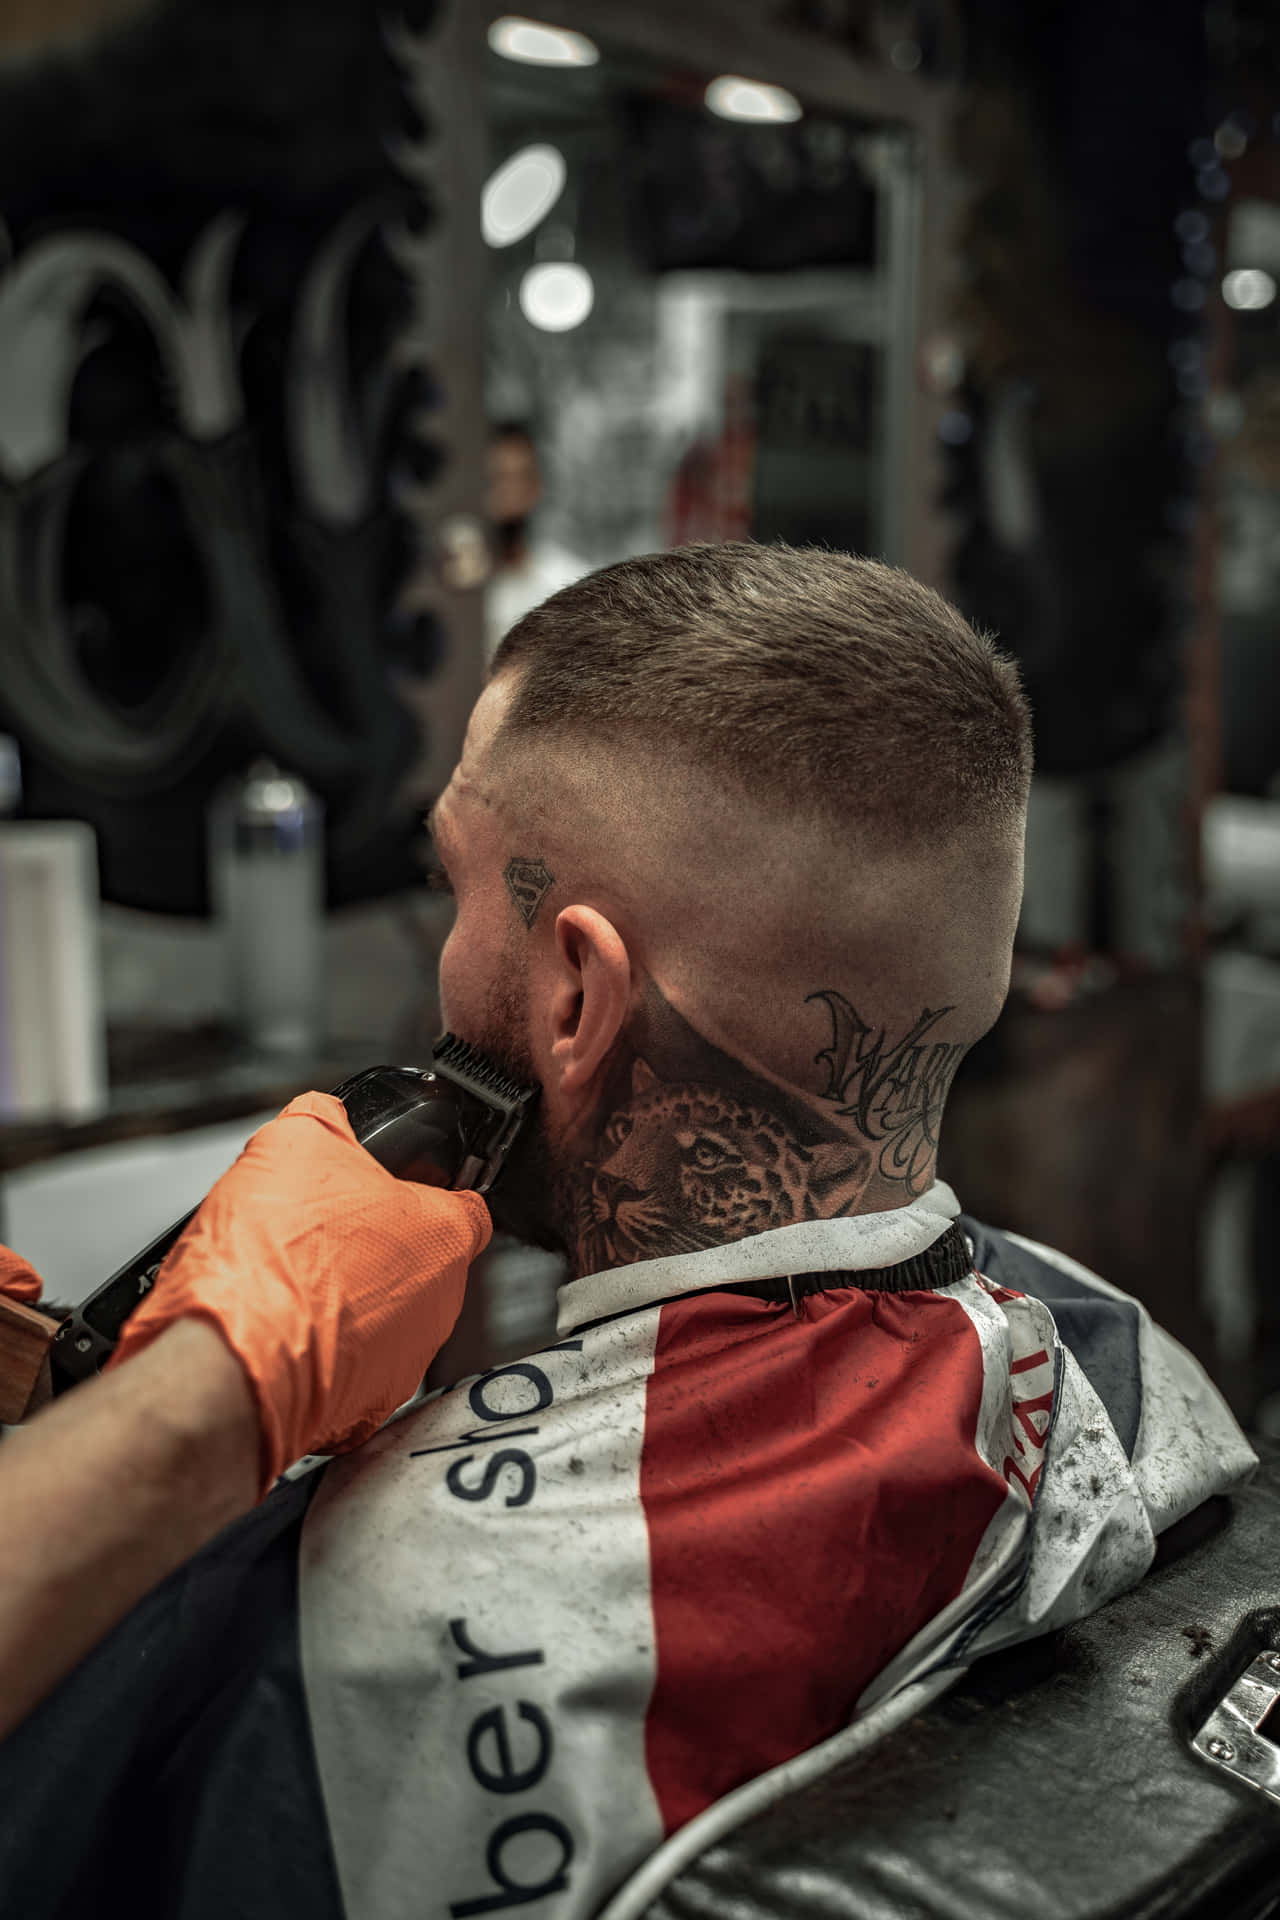 Skilled Barber Perfecting A Classic Haircut